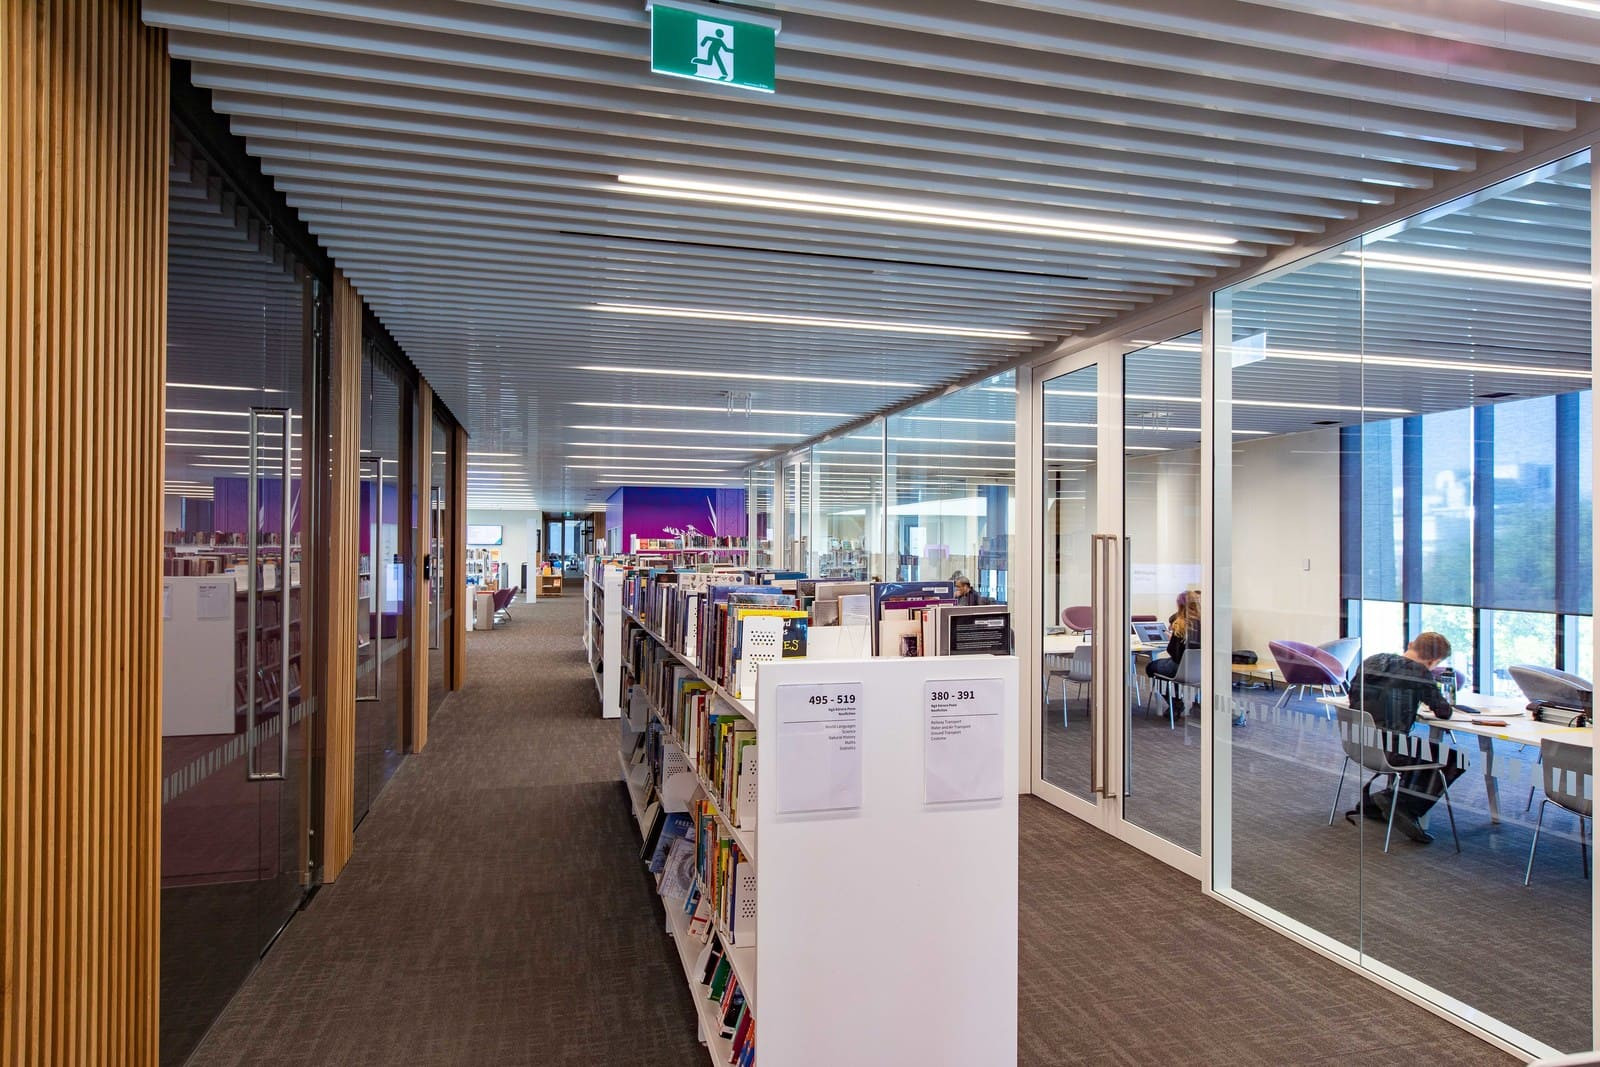 Modern library with glass doors, unique ceiling, and shelves full of books